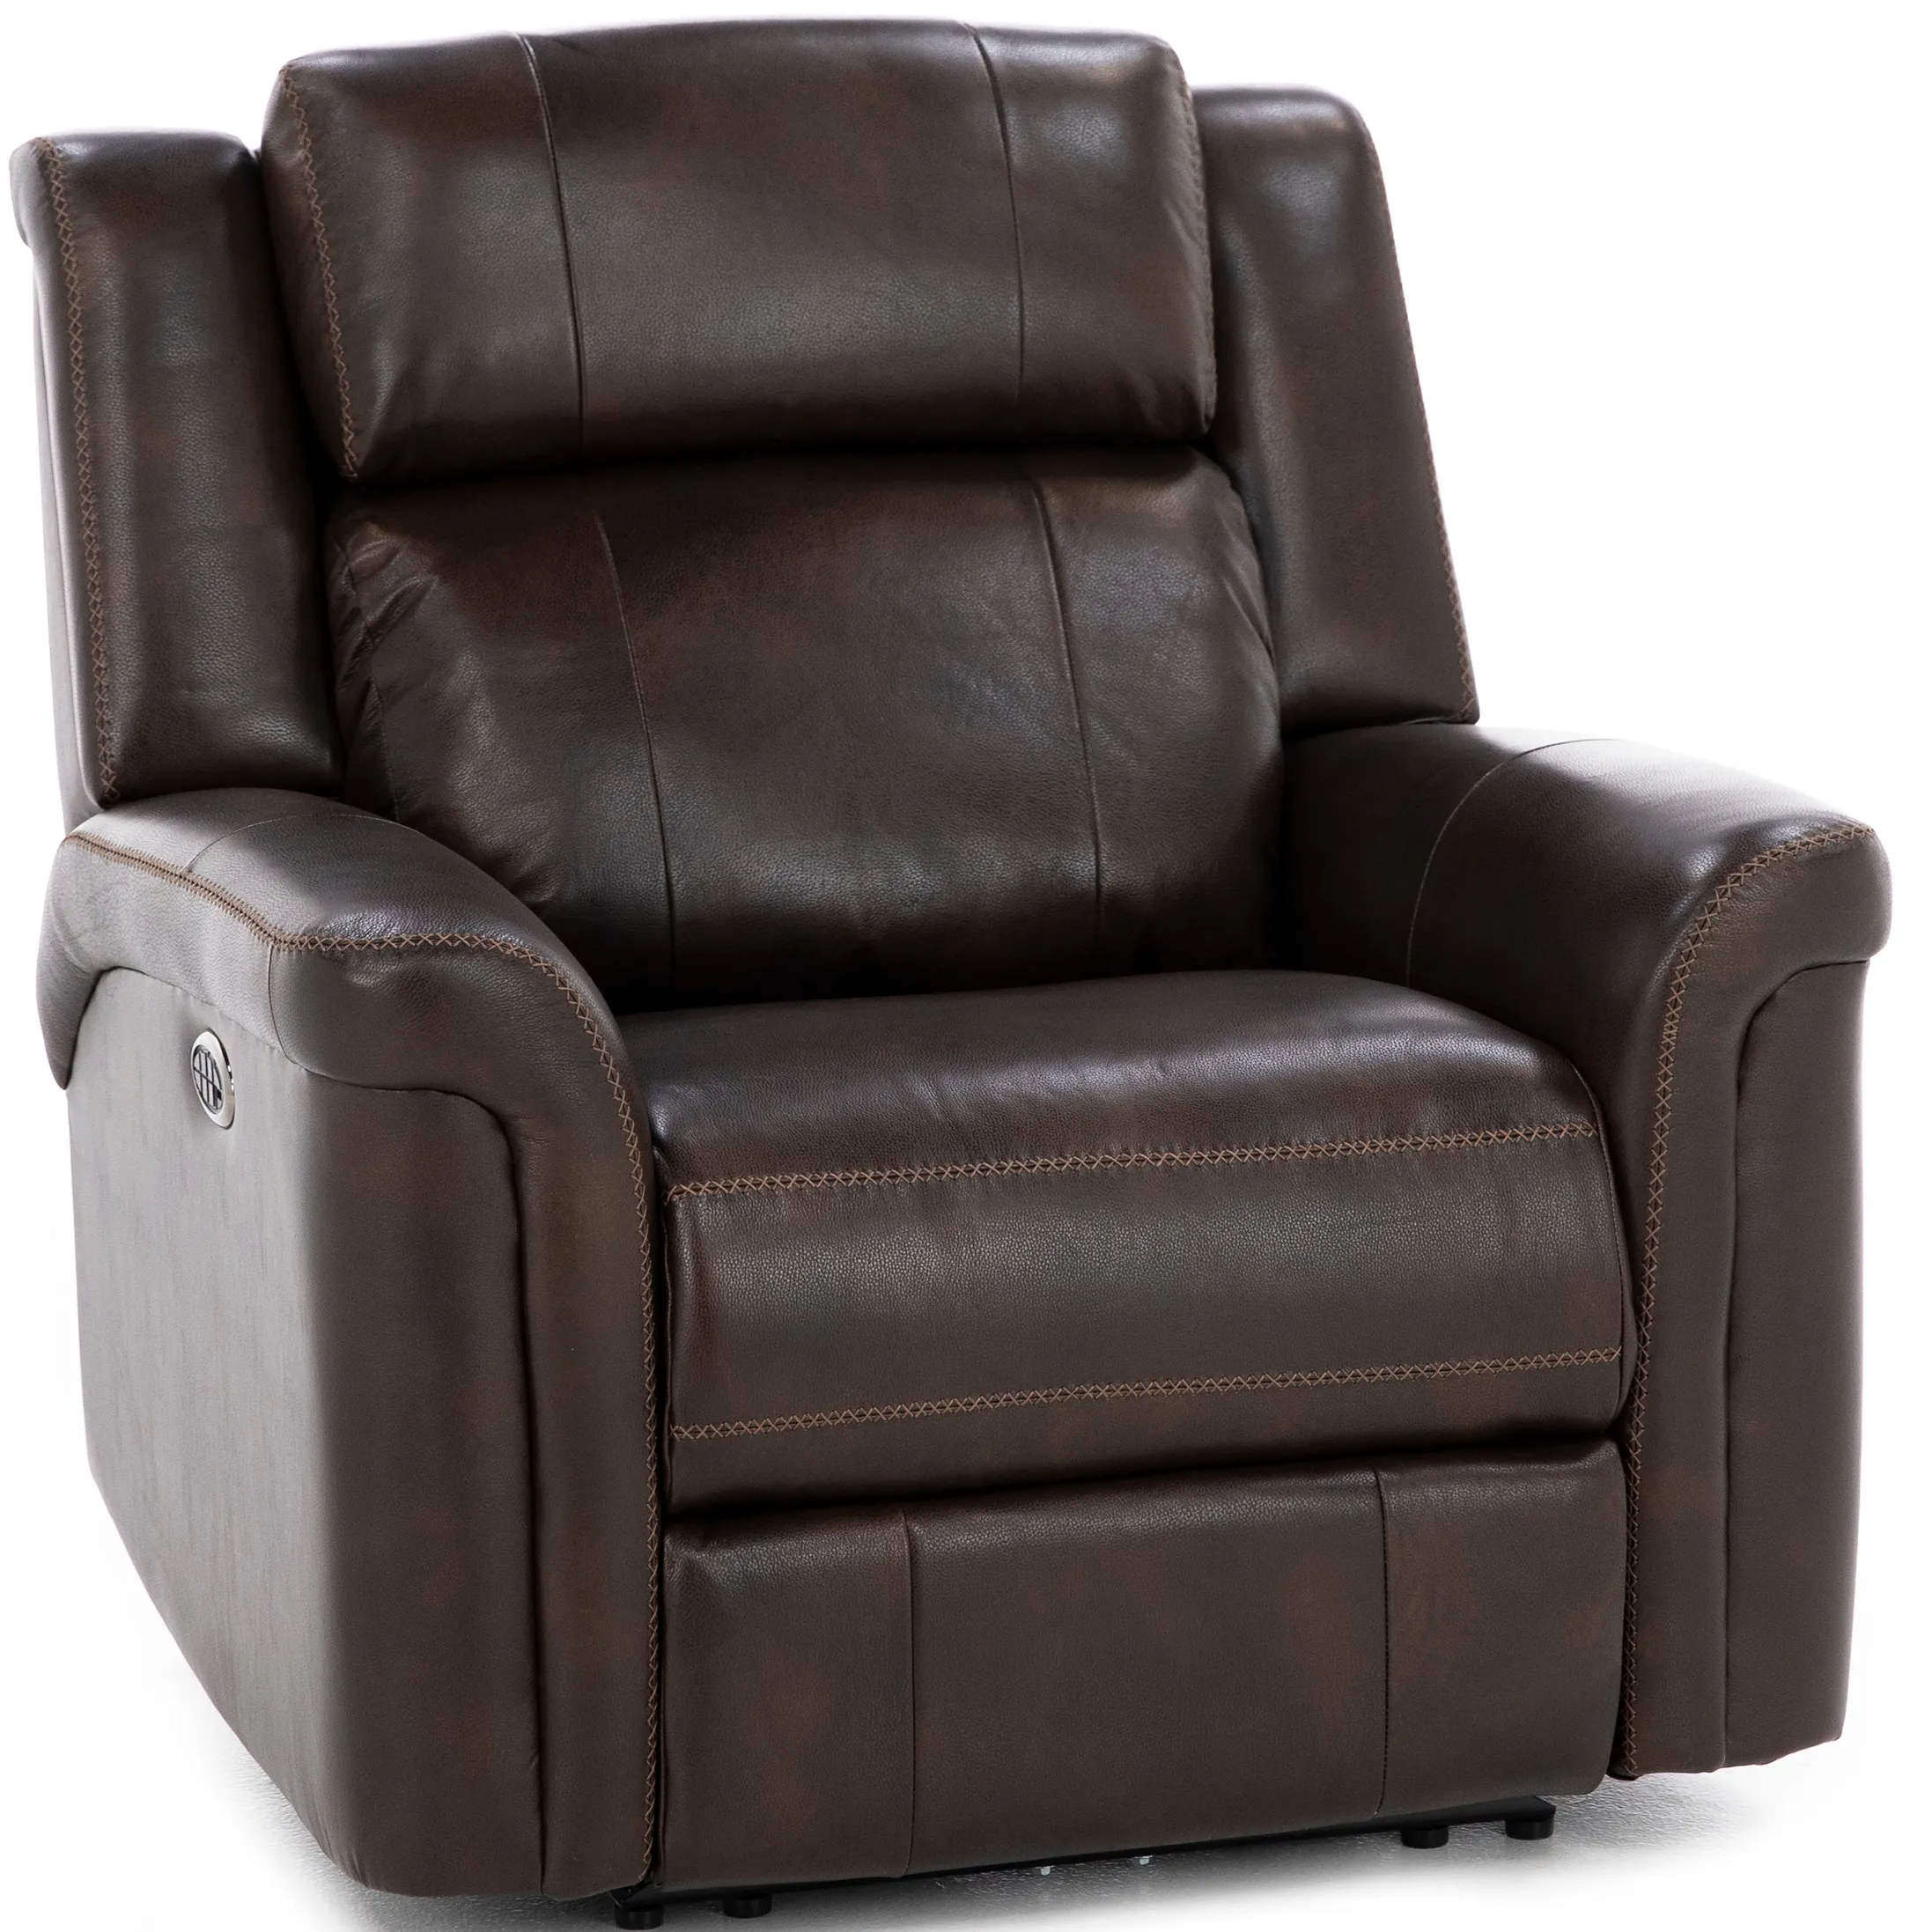 Direct Design Chicago Leather Fully Loaded Wall Saver Recliner